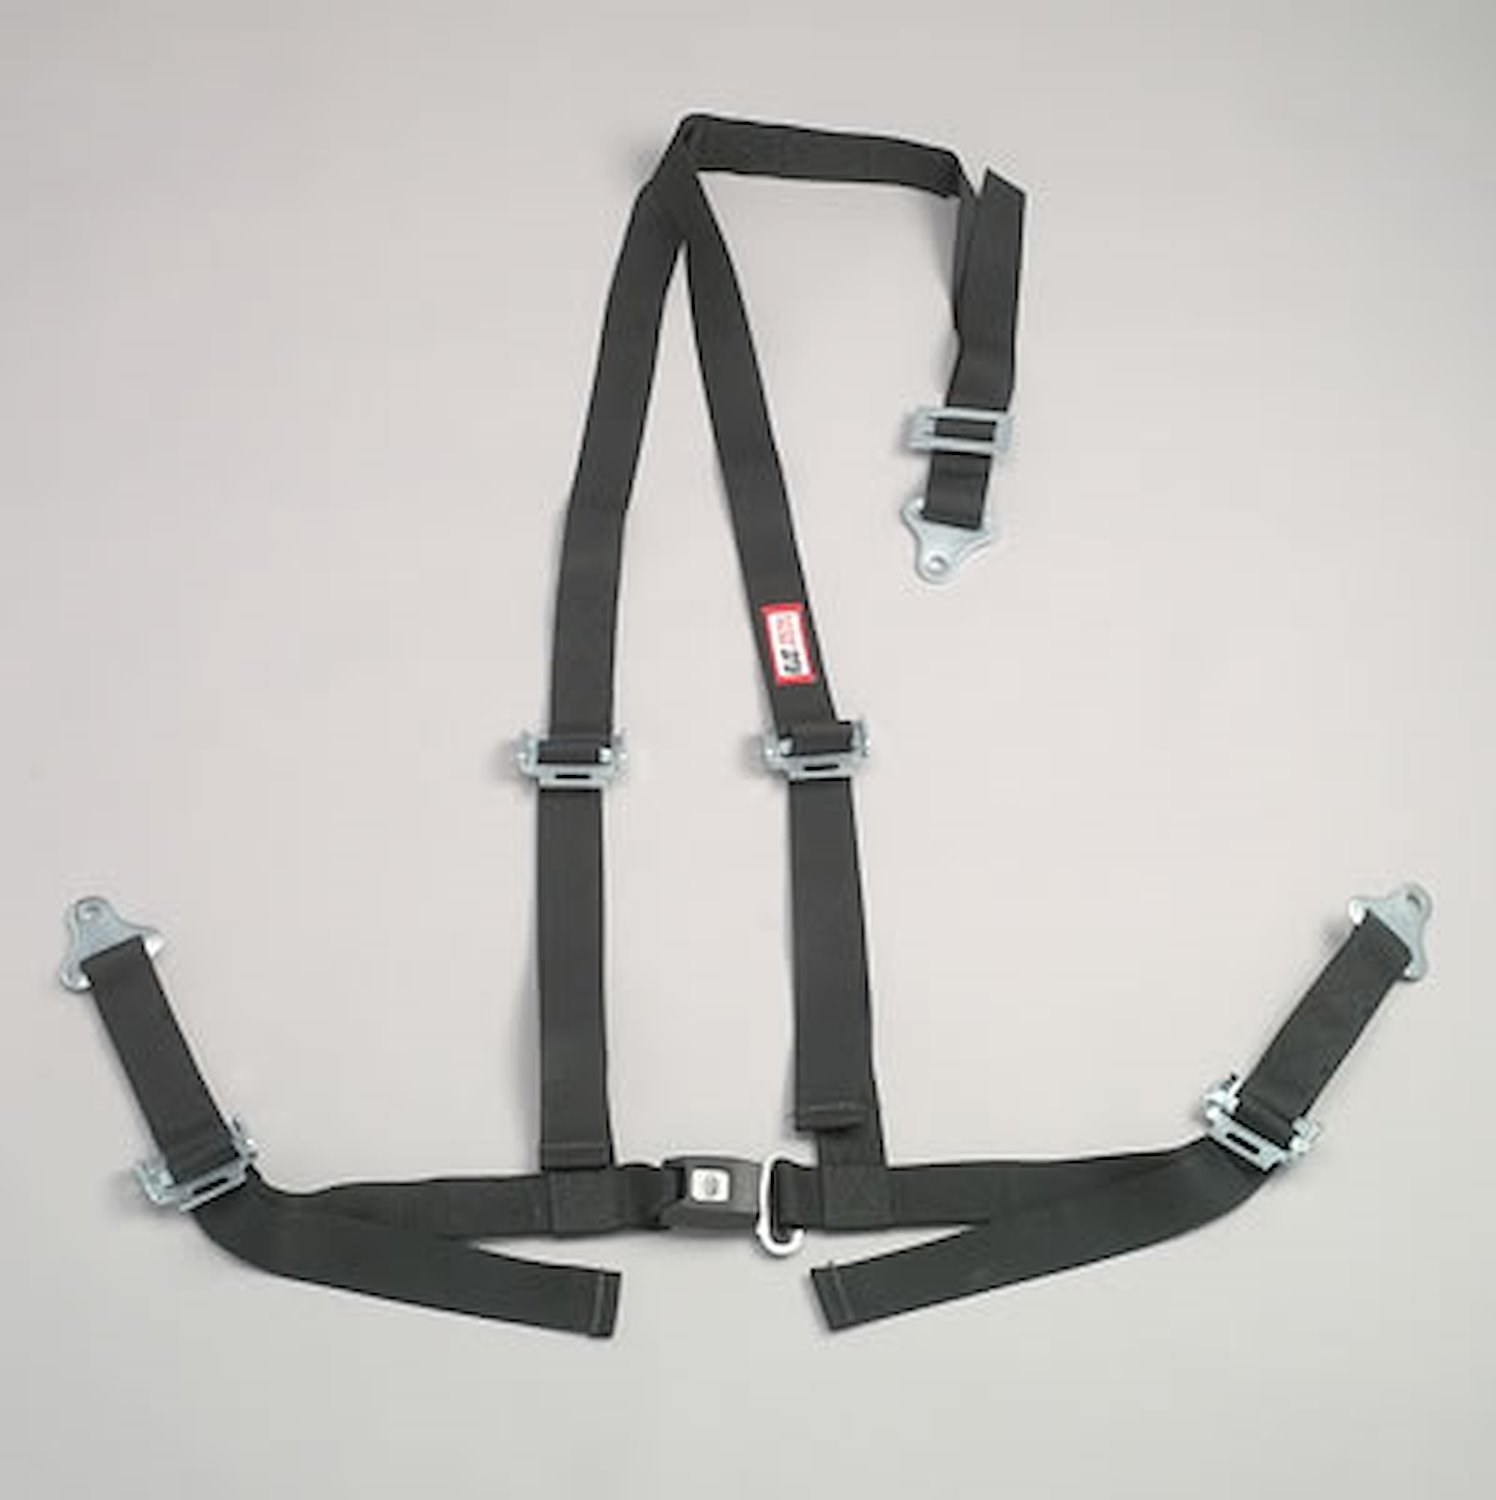 NON-SFI B&T HARNESS 2 PULL DOWN Lap Belt SNAP 2 S. H. Individual ROLL BAR Mount WRAP/SNAP w/STERNUM STRAP OD GREEN